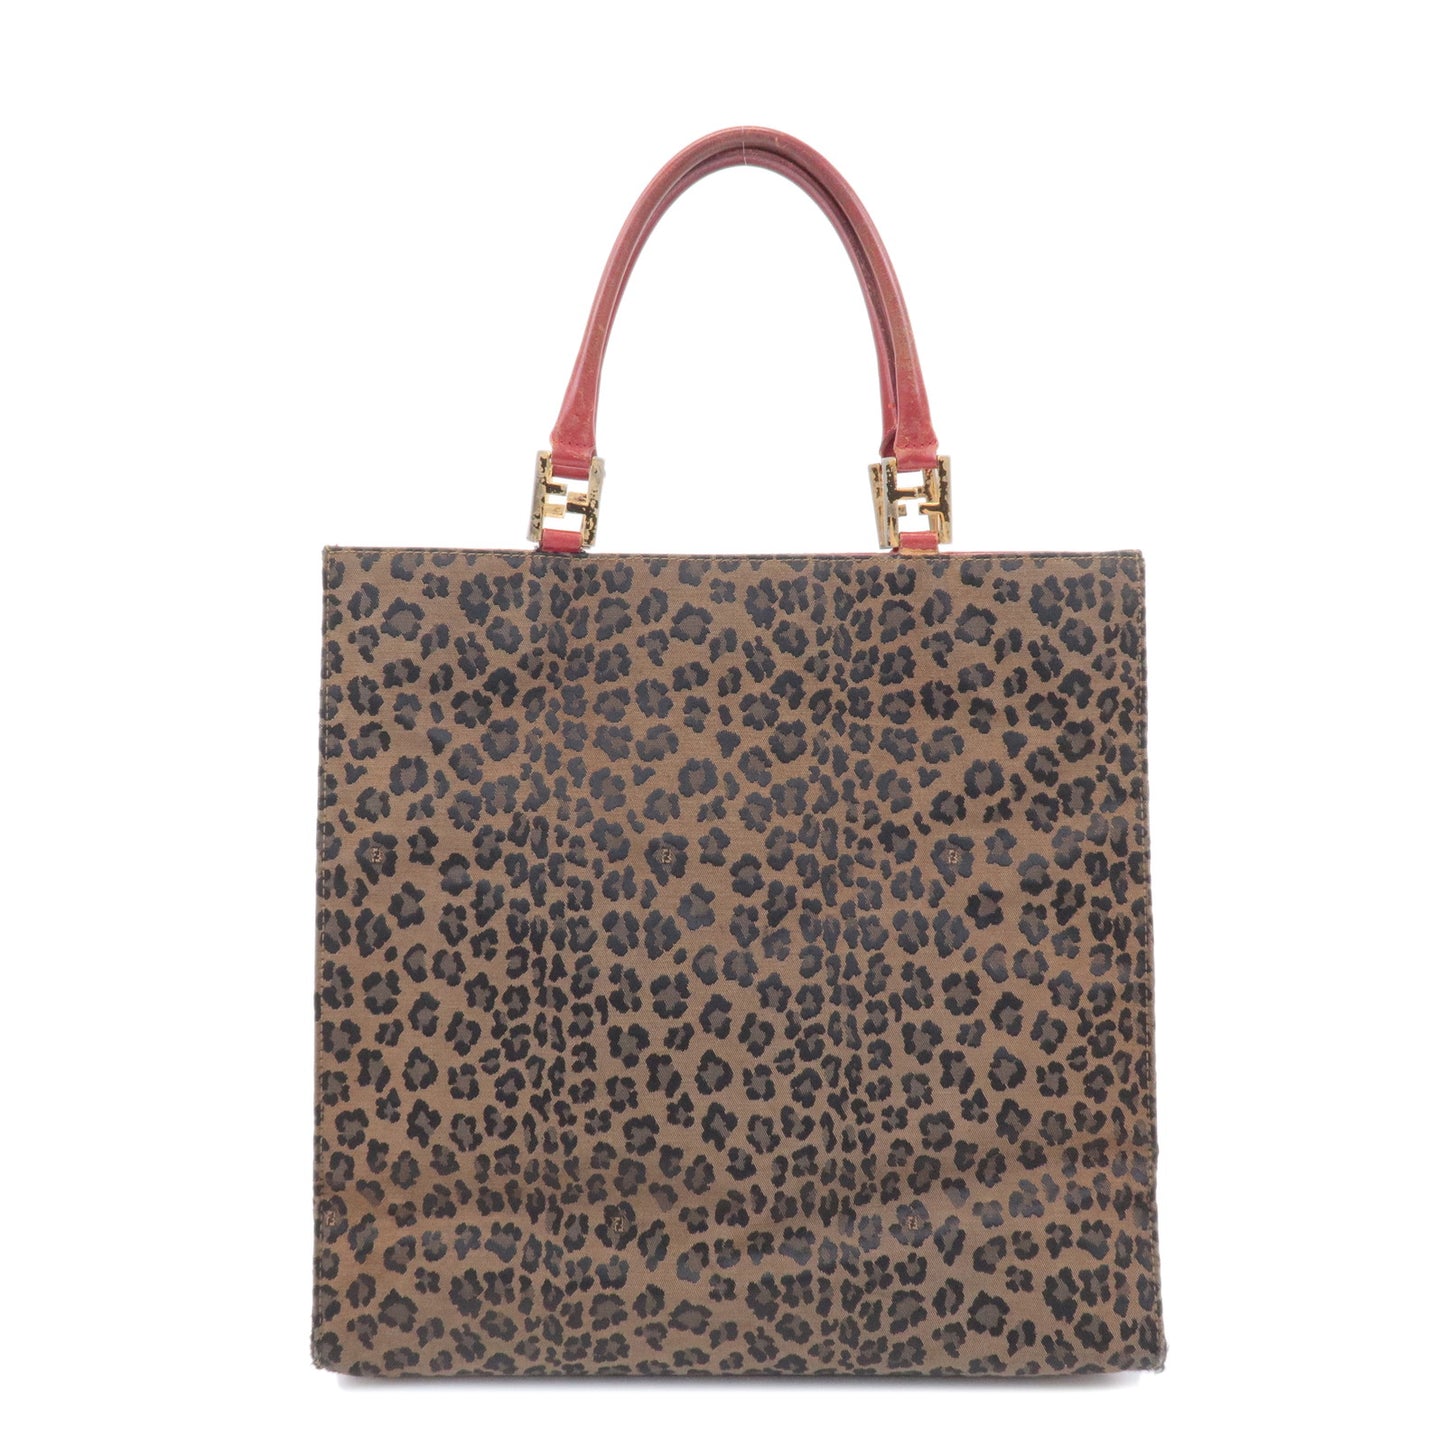 FENDI Canvas Leather Leopard Tote Bag Hand Bag Brown Red